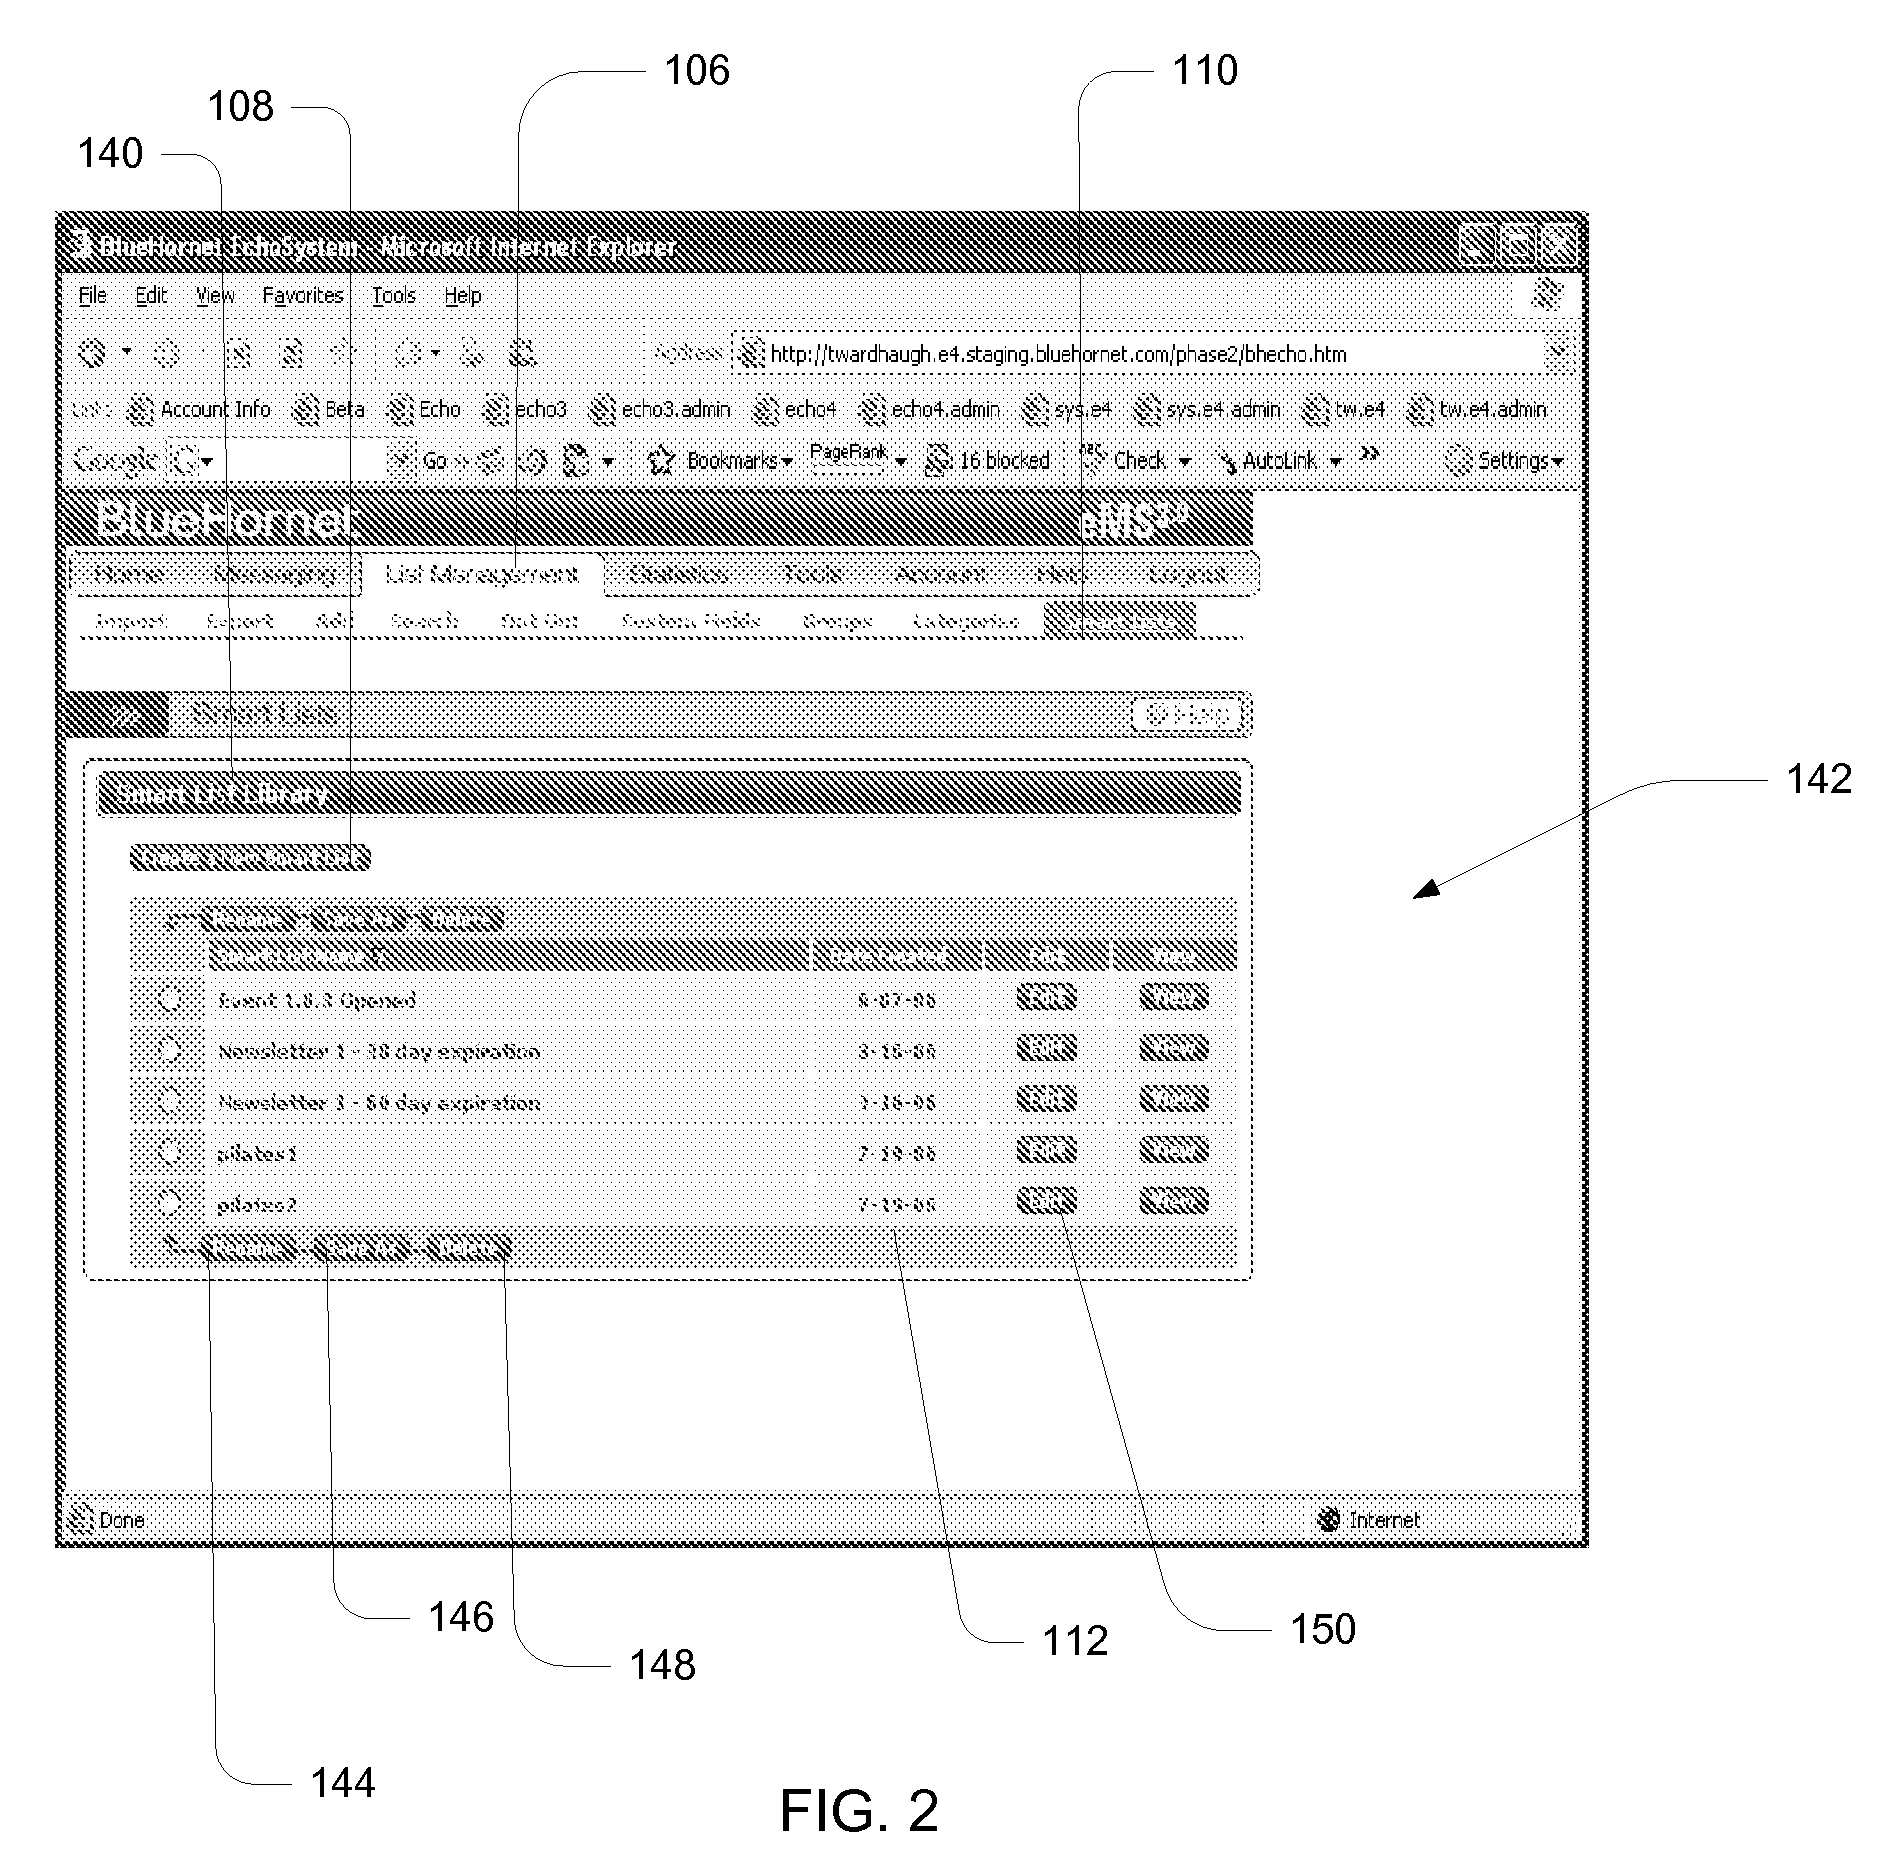 Subscriber List System and Method